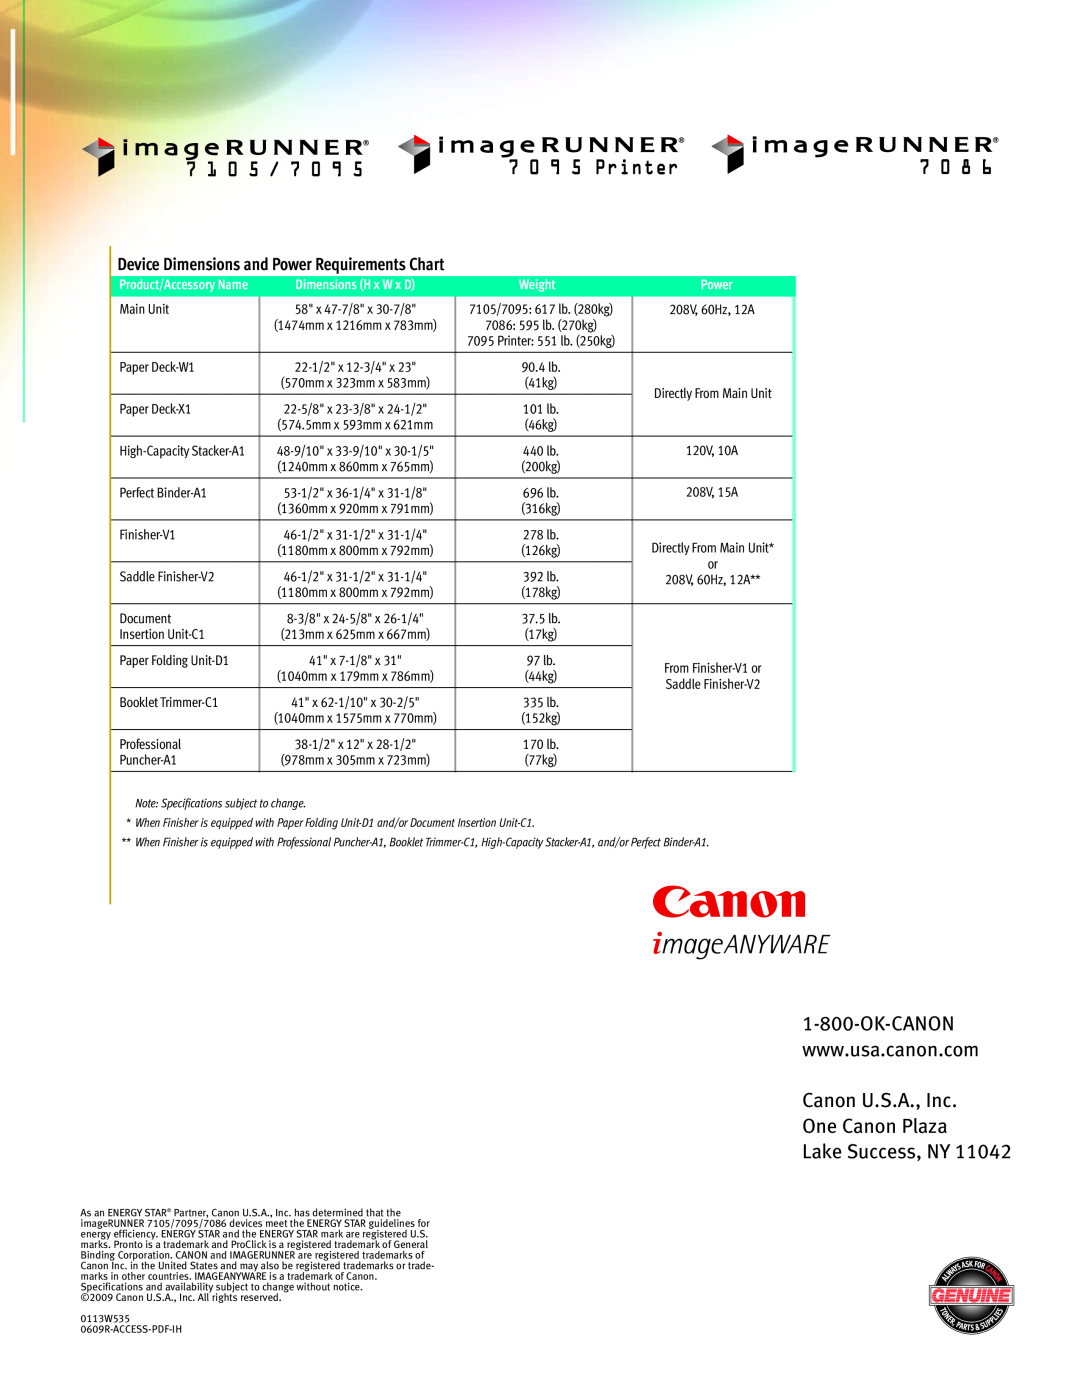 Canon 7095 PRINTER Canon U.S.A., Inc One Canon Plaza Lake Success, NY, Device Dimensions and Power Requirements Chart 